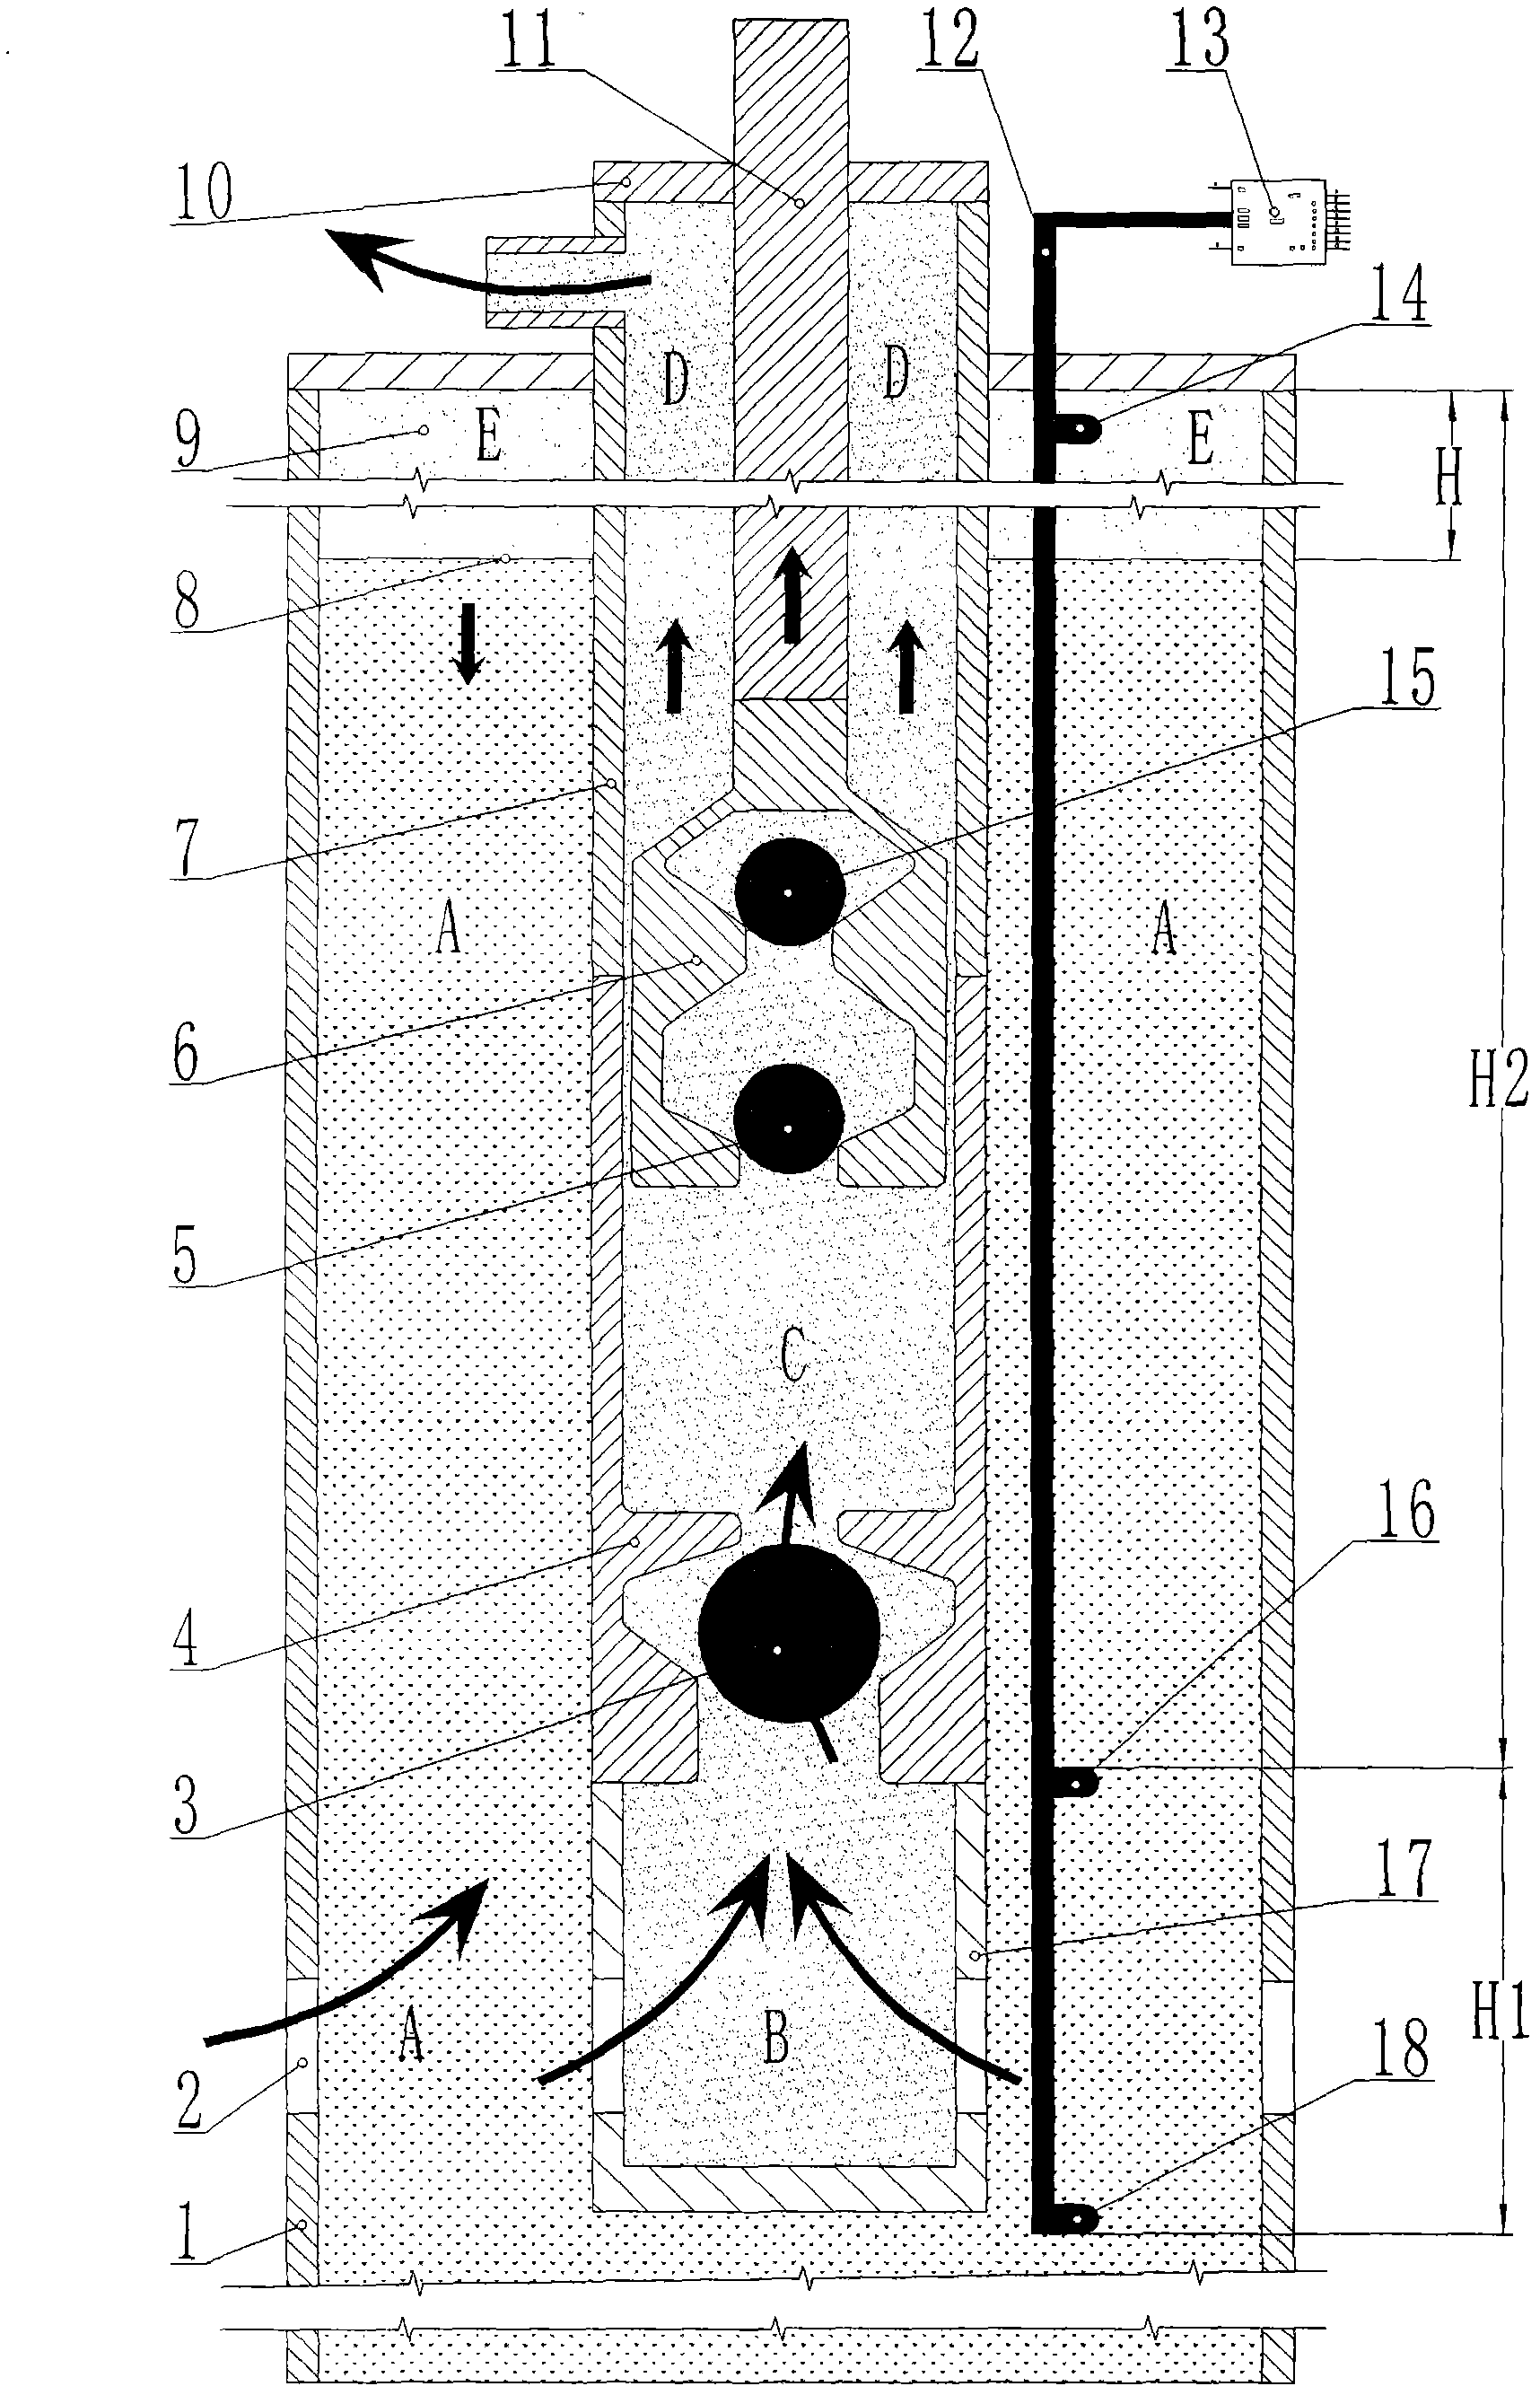 Device and method for continuously measuring working fluid level depth of oil well and continuously metering produced liquid